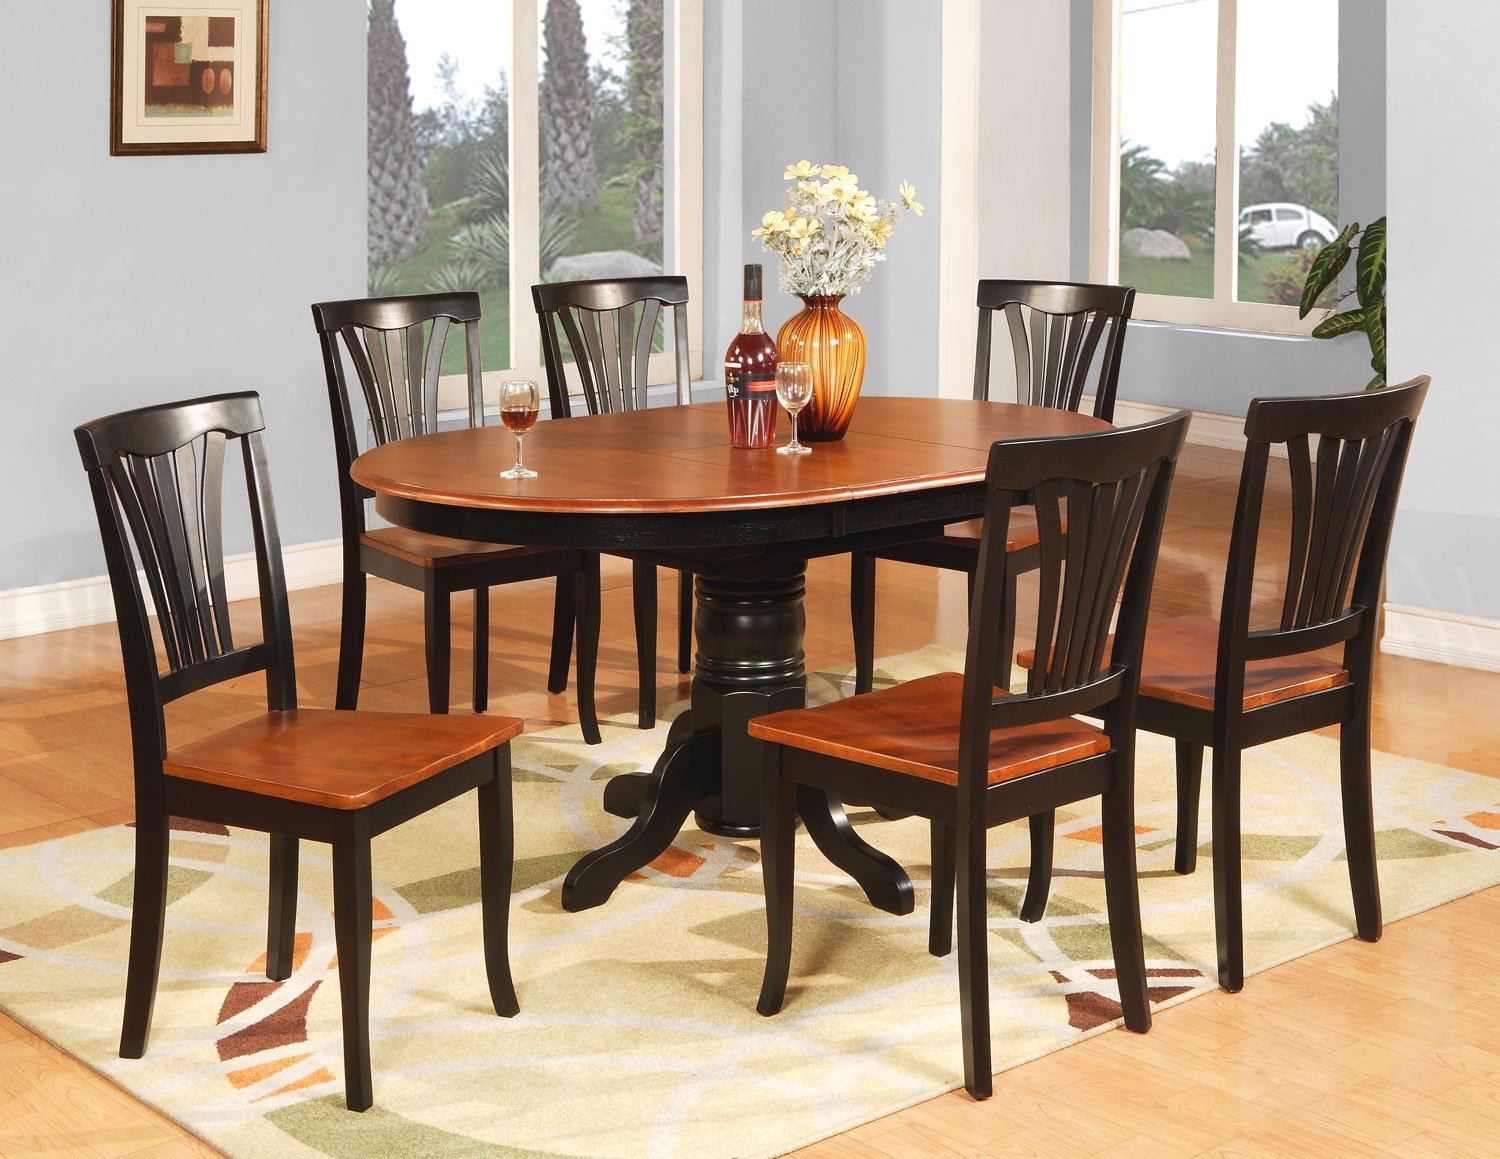 7-PC Avon Oval Dining Single Pedestal Table and 6 chairs in Black